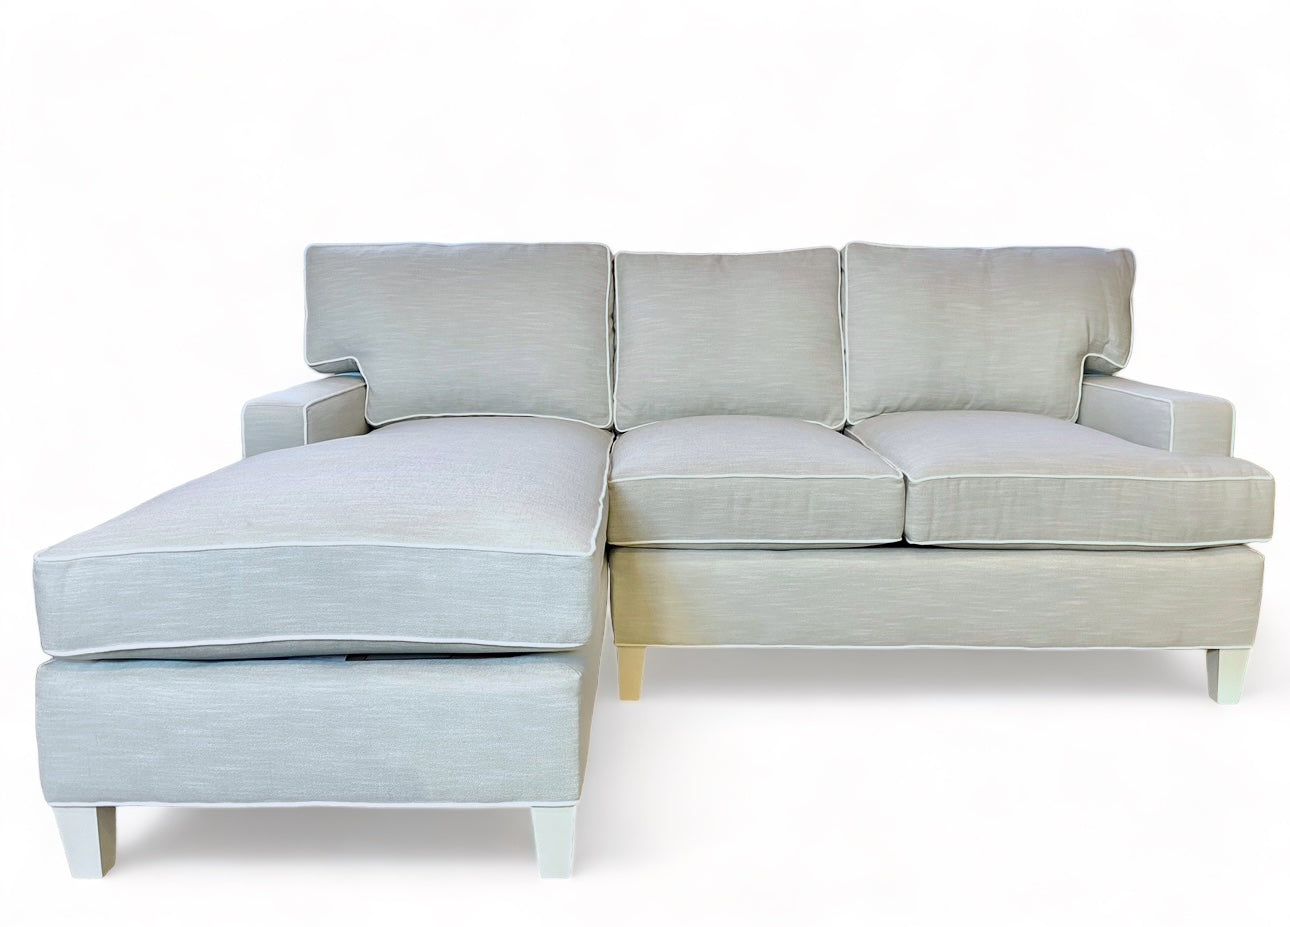 Custom Loveseat/Chaise Sectional in Performance fabric